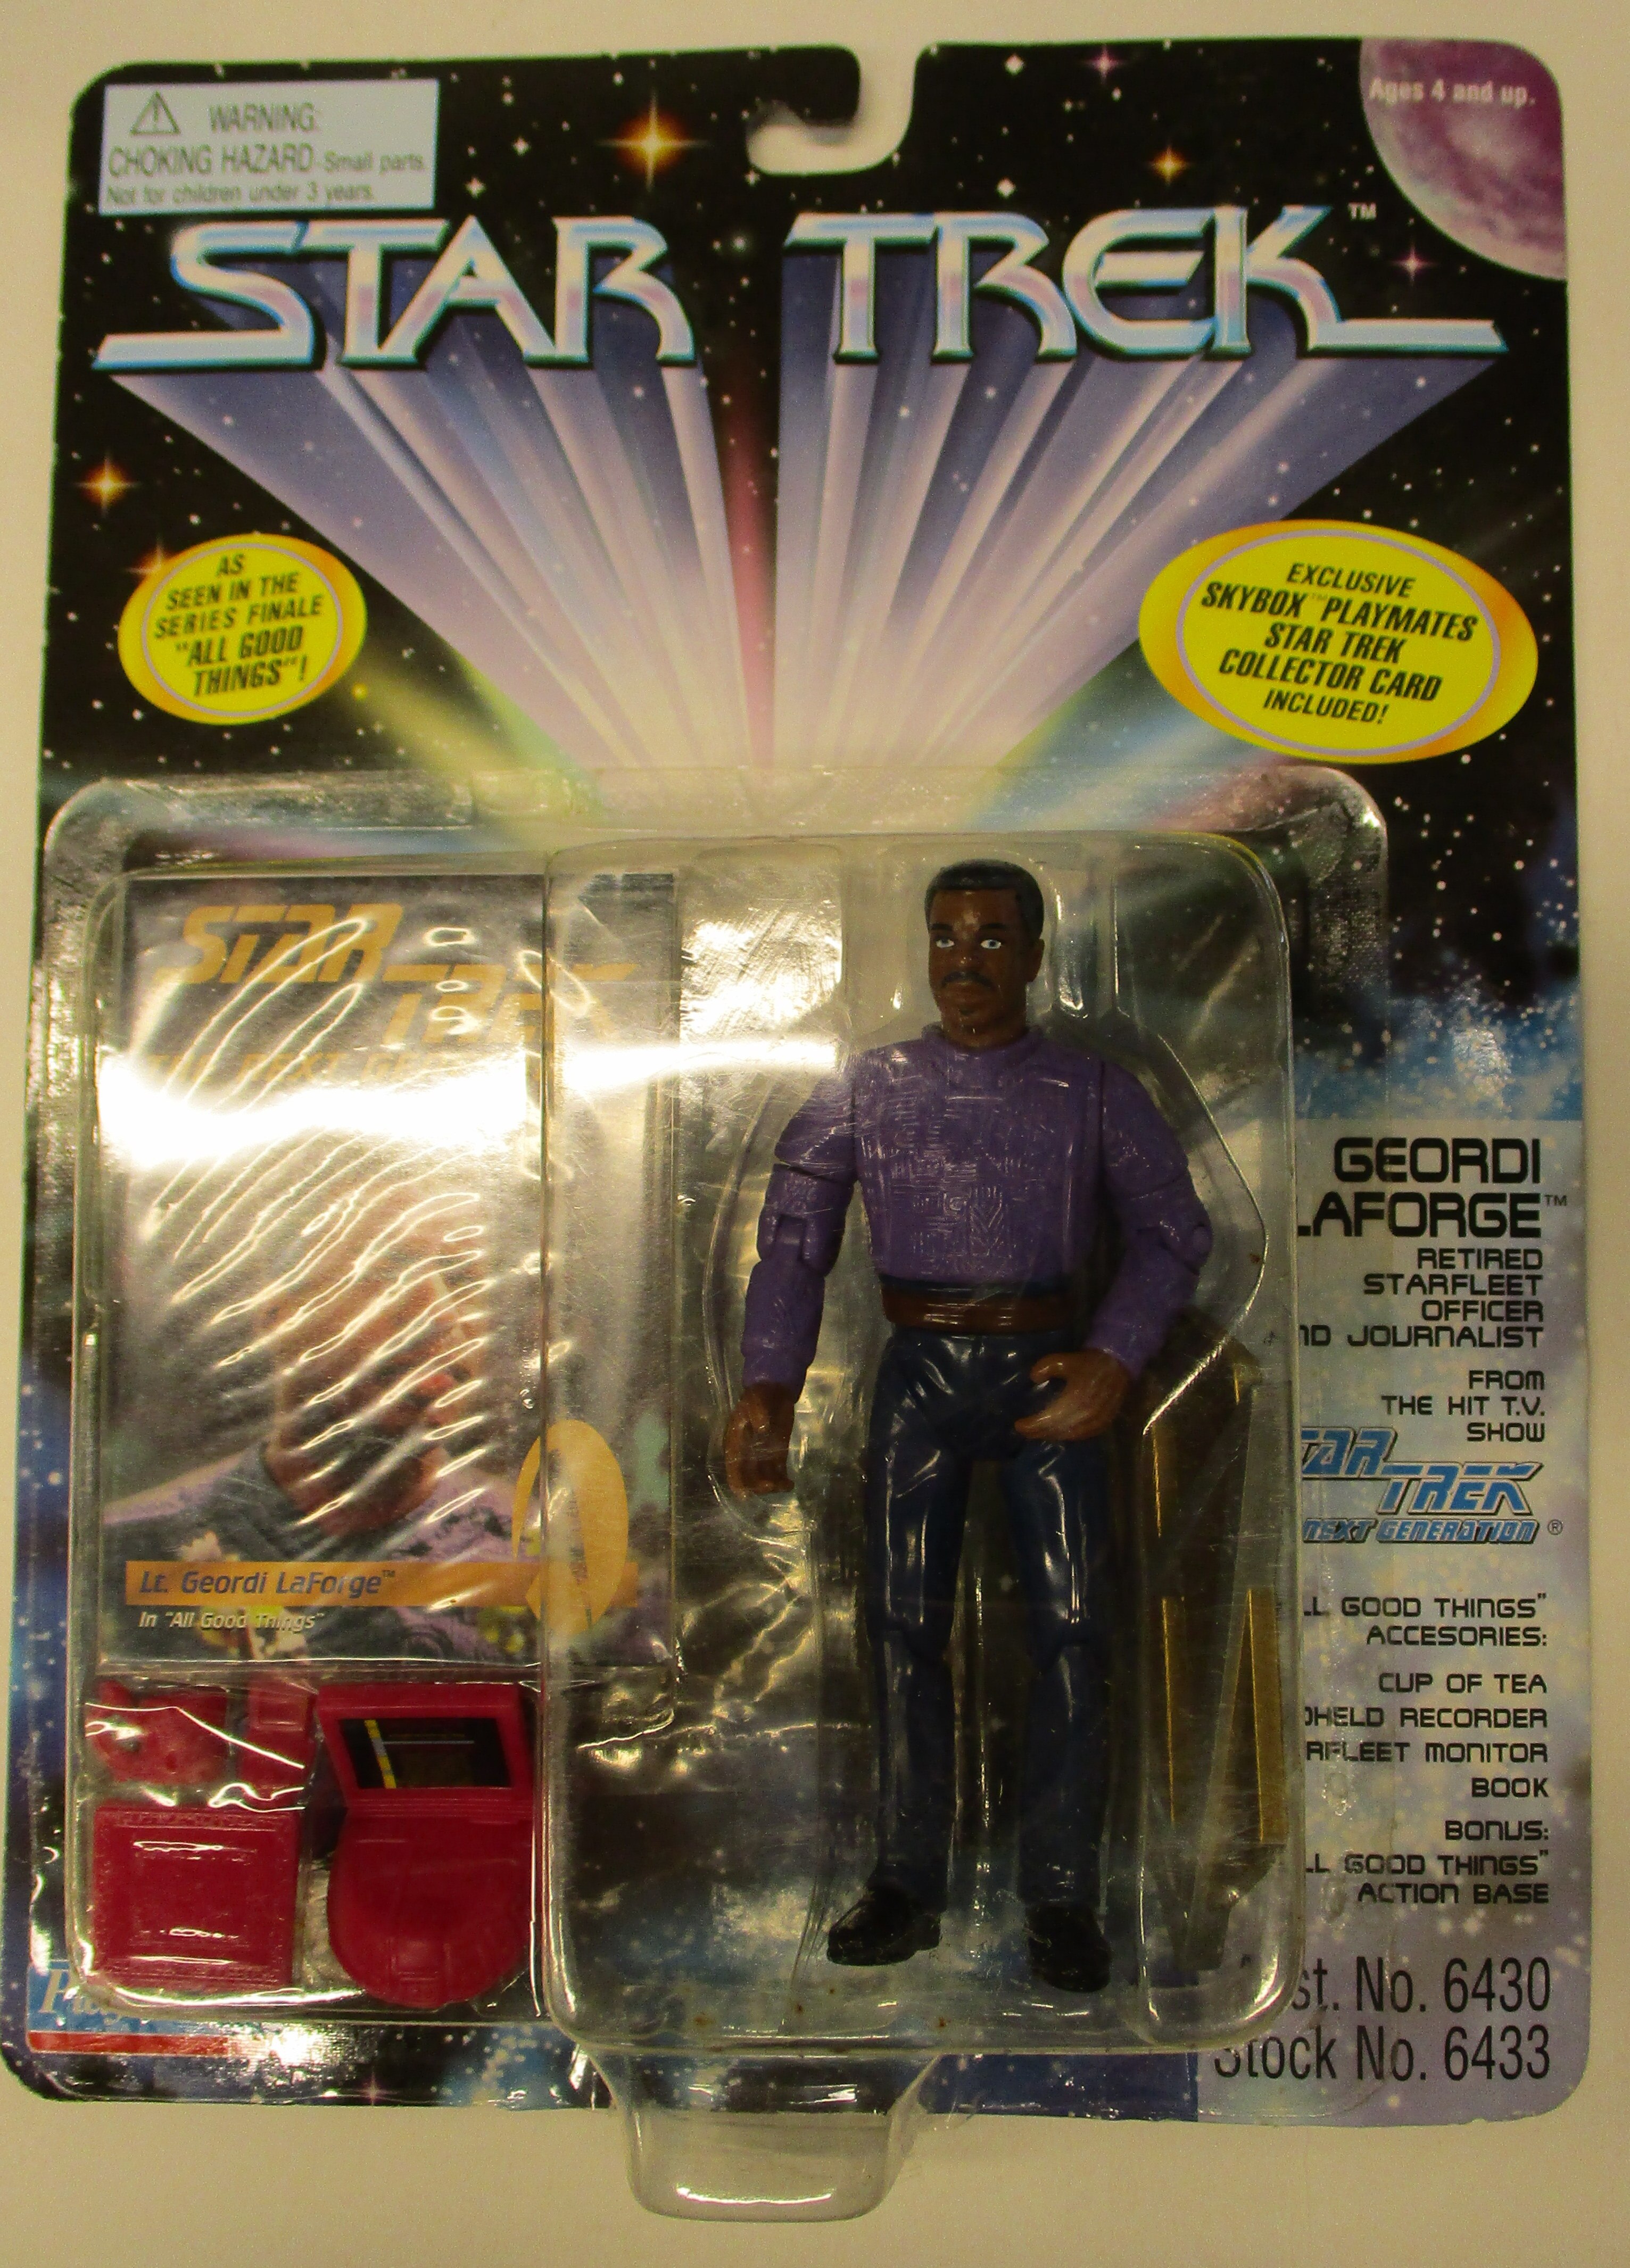 Playmates Toys Star Trek the Next Generation Geordi LaForge All Good Things Action Figure for sale online